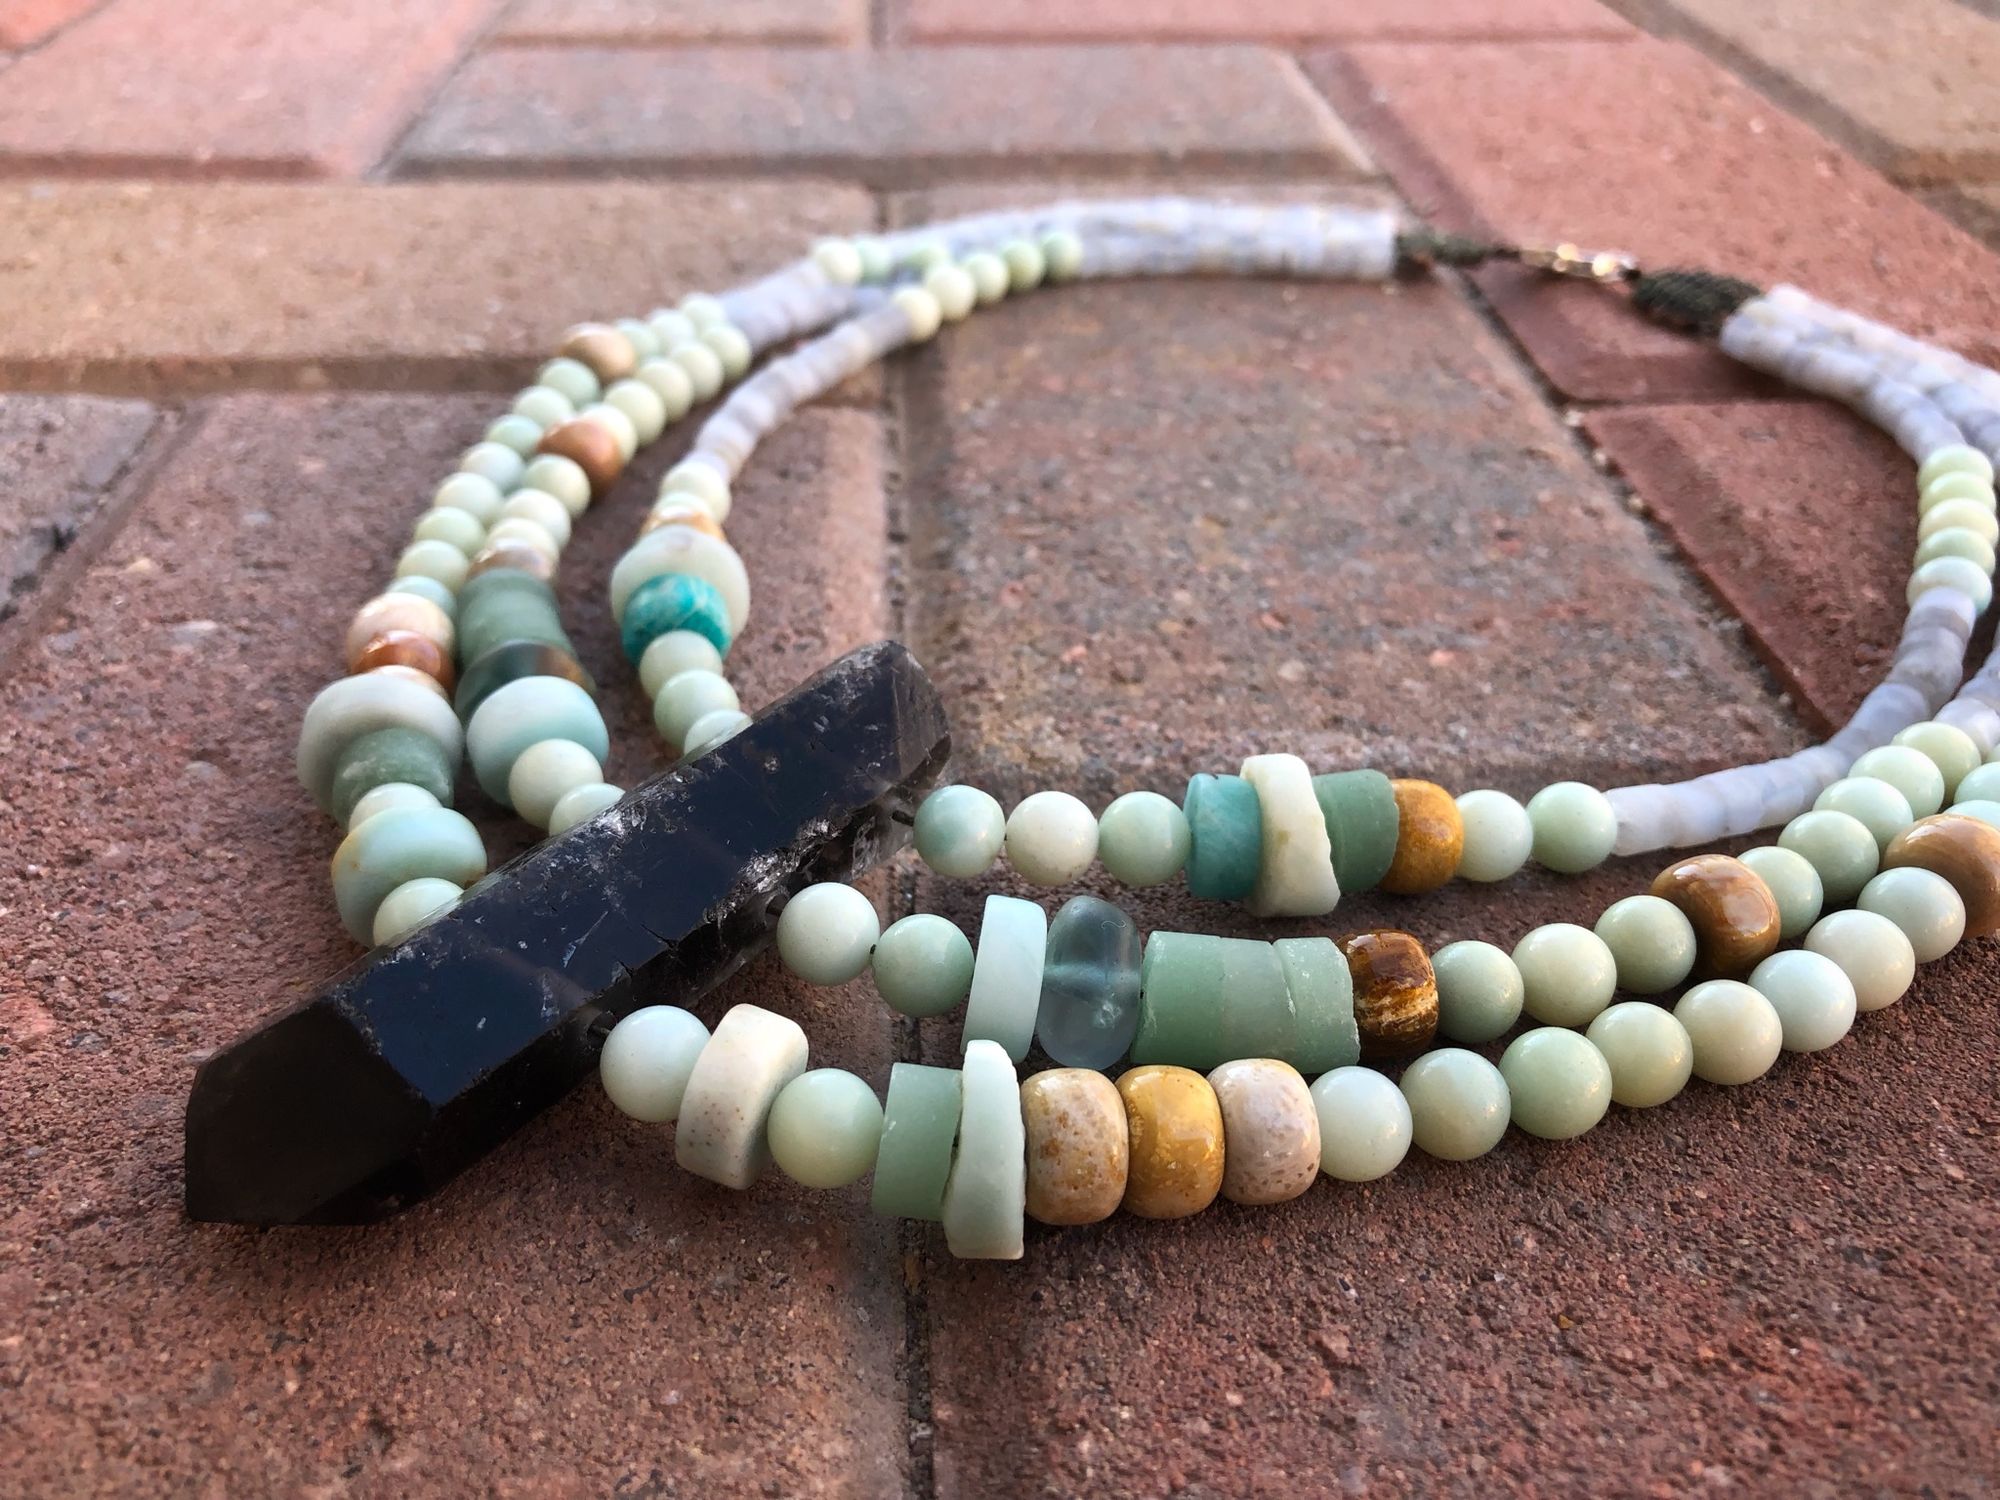 three strand necklace made with a grey crystal point and blue-green beads laying on a red brick floor